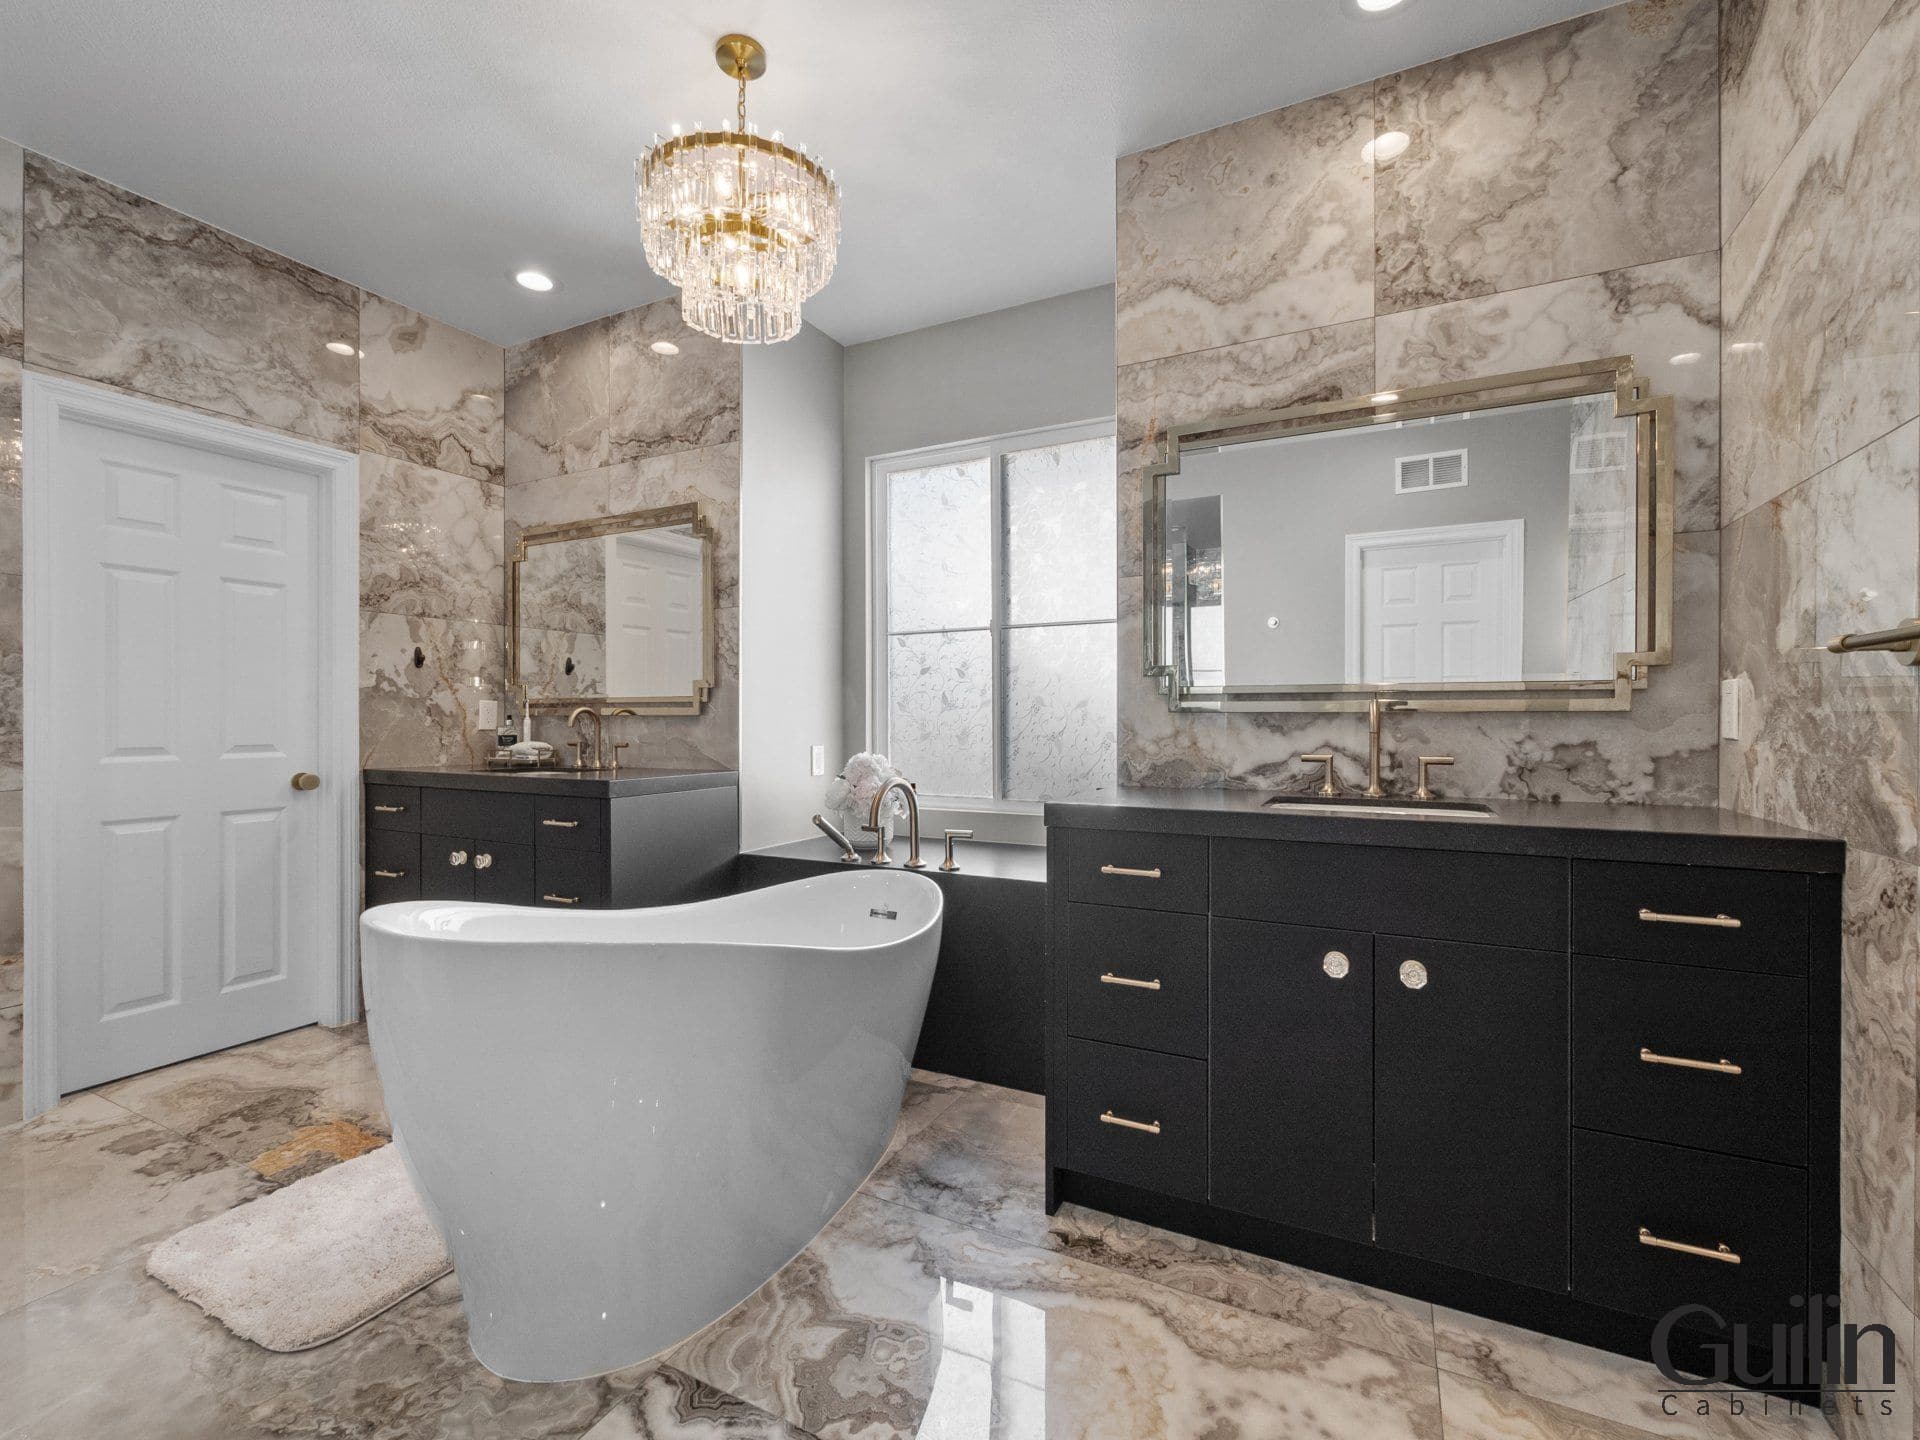 Master Bathroom Remodel Ideas You'll Want to Steal!